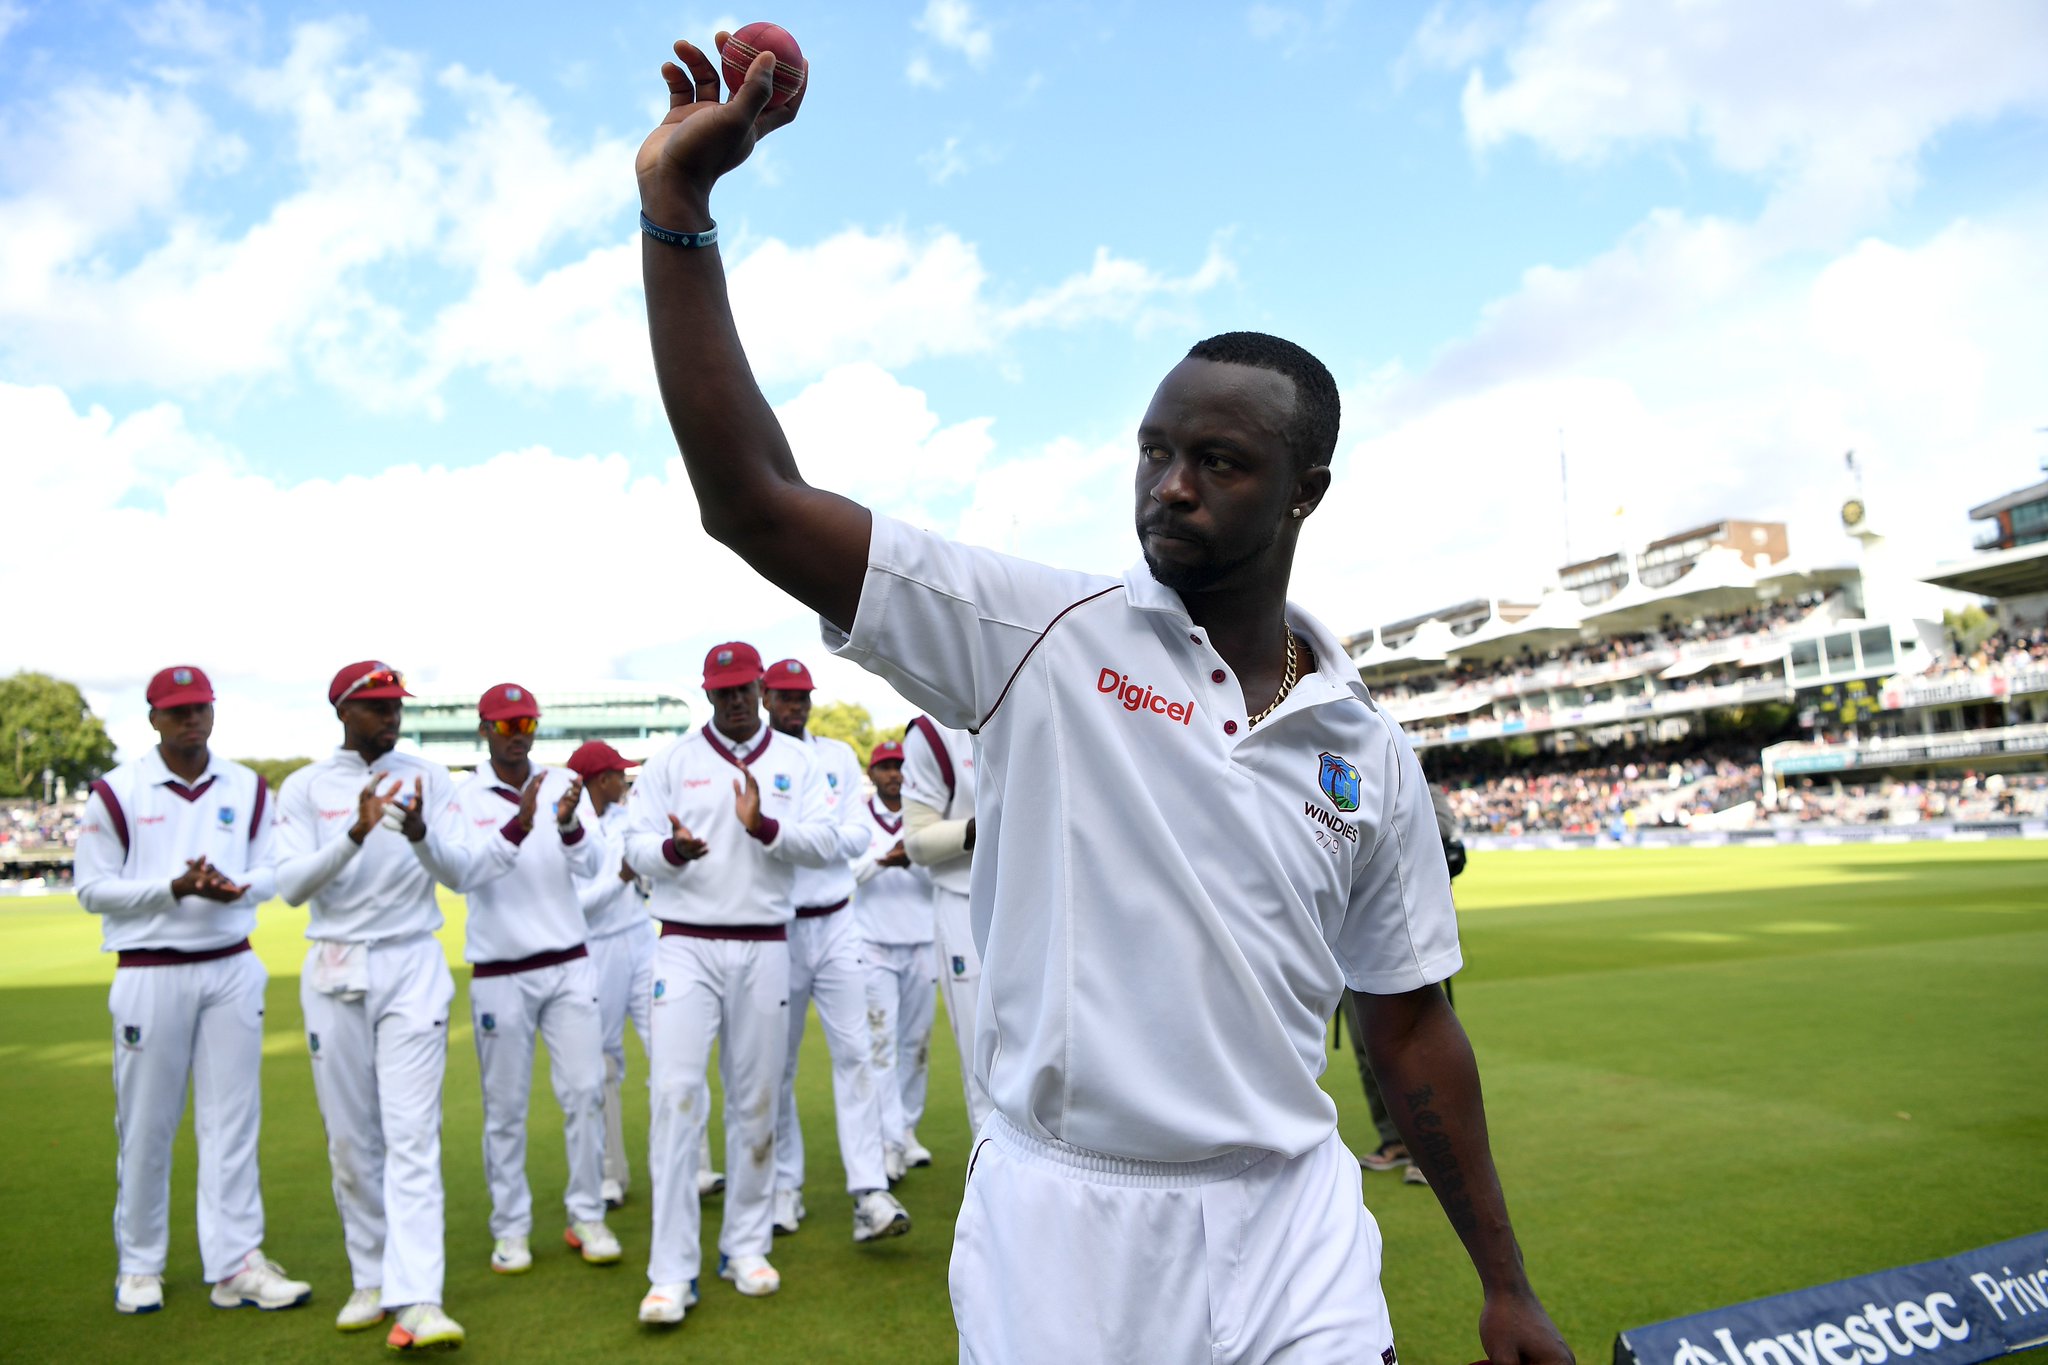 Kemar Roach needs to have someone like Curtly Ambrose to take pressure off him, admits Courtney Walsh